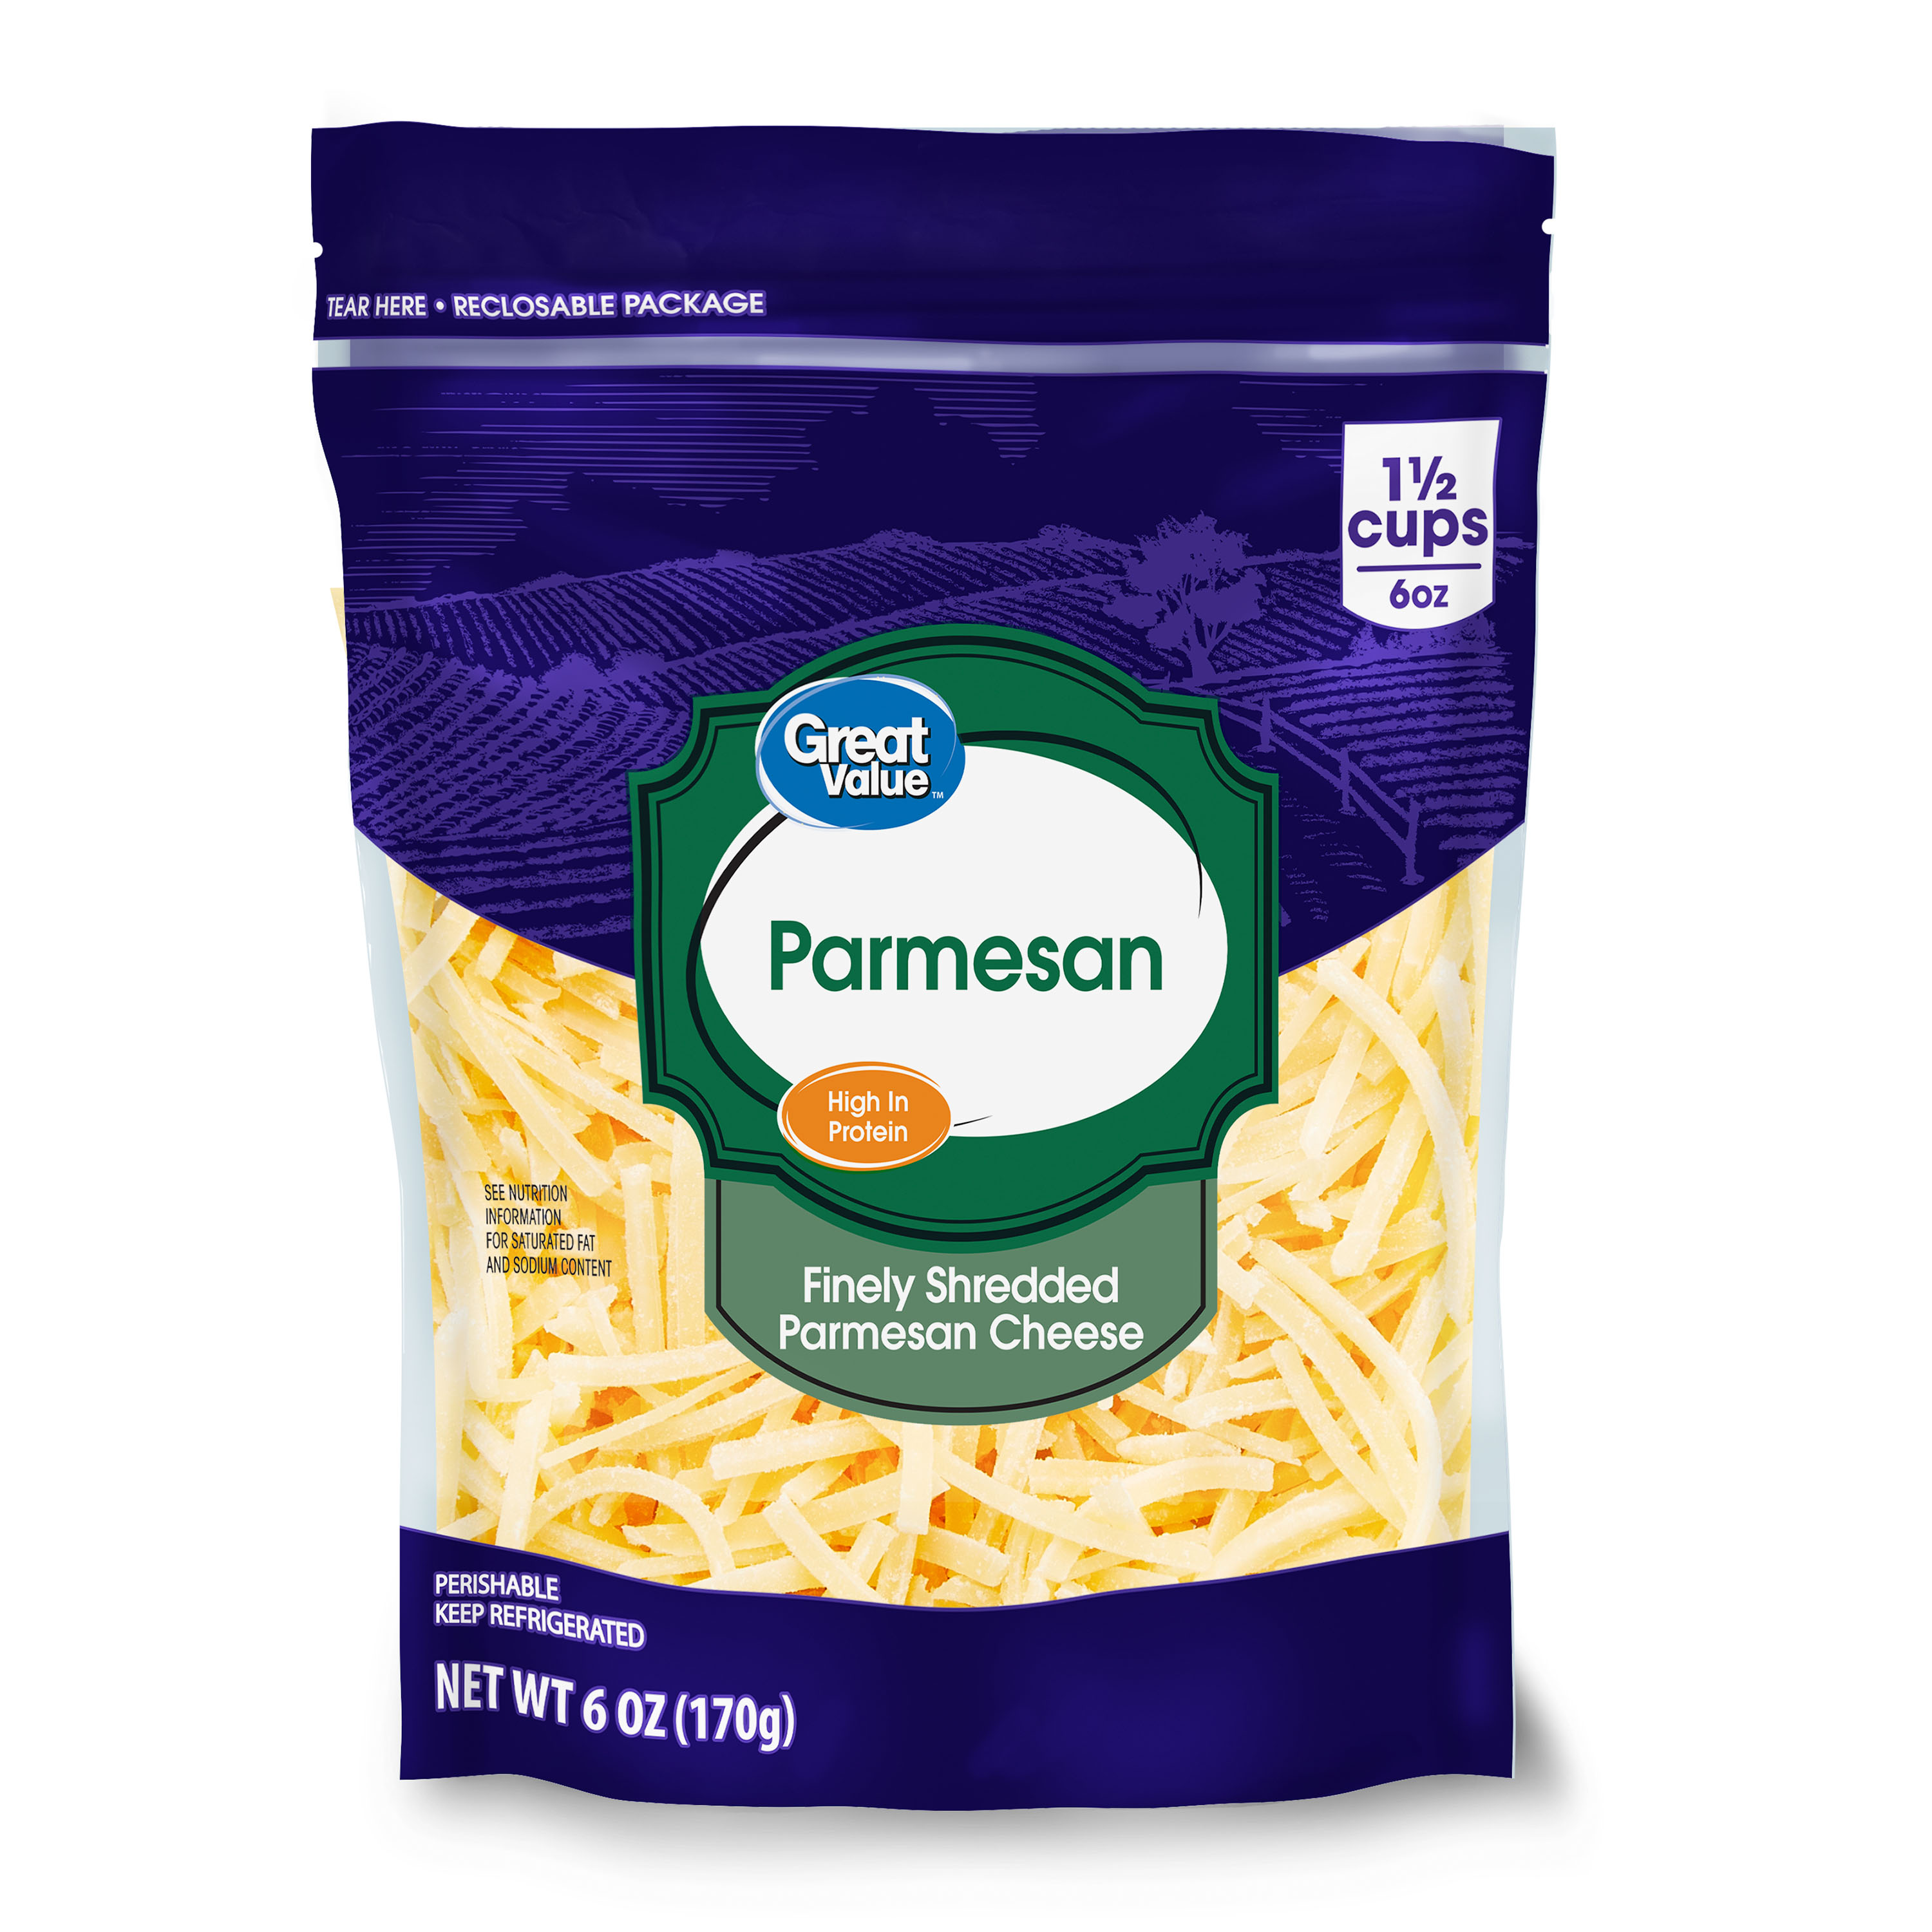 Great Value Finely Shredded Parmesan Cheese, 6 oz - image 1 of 9